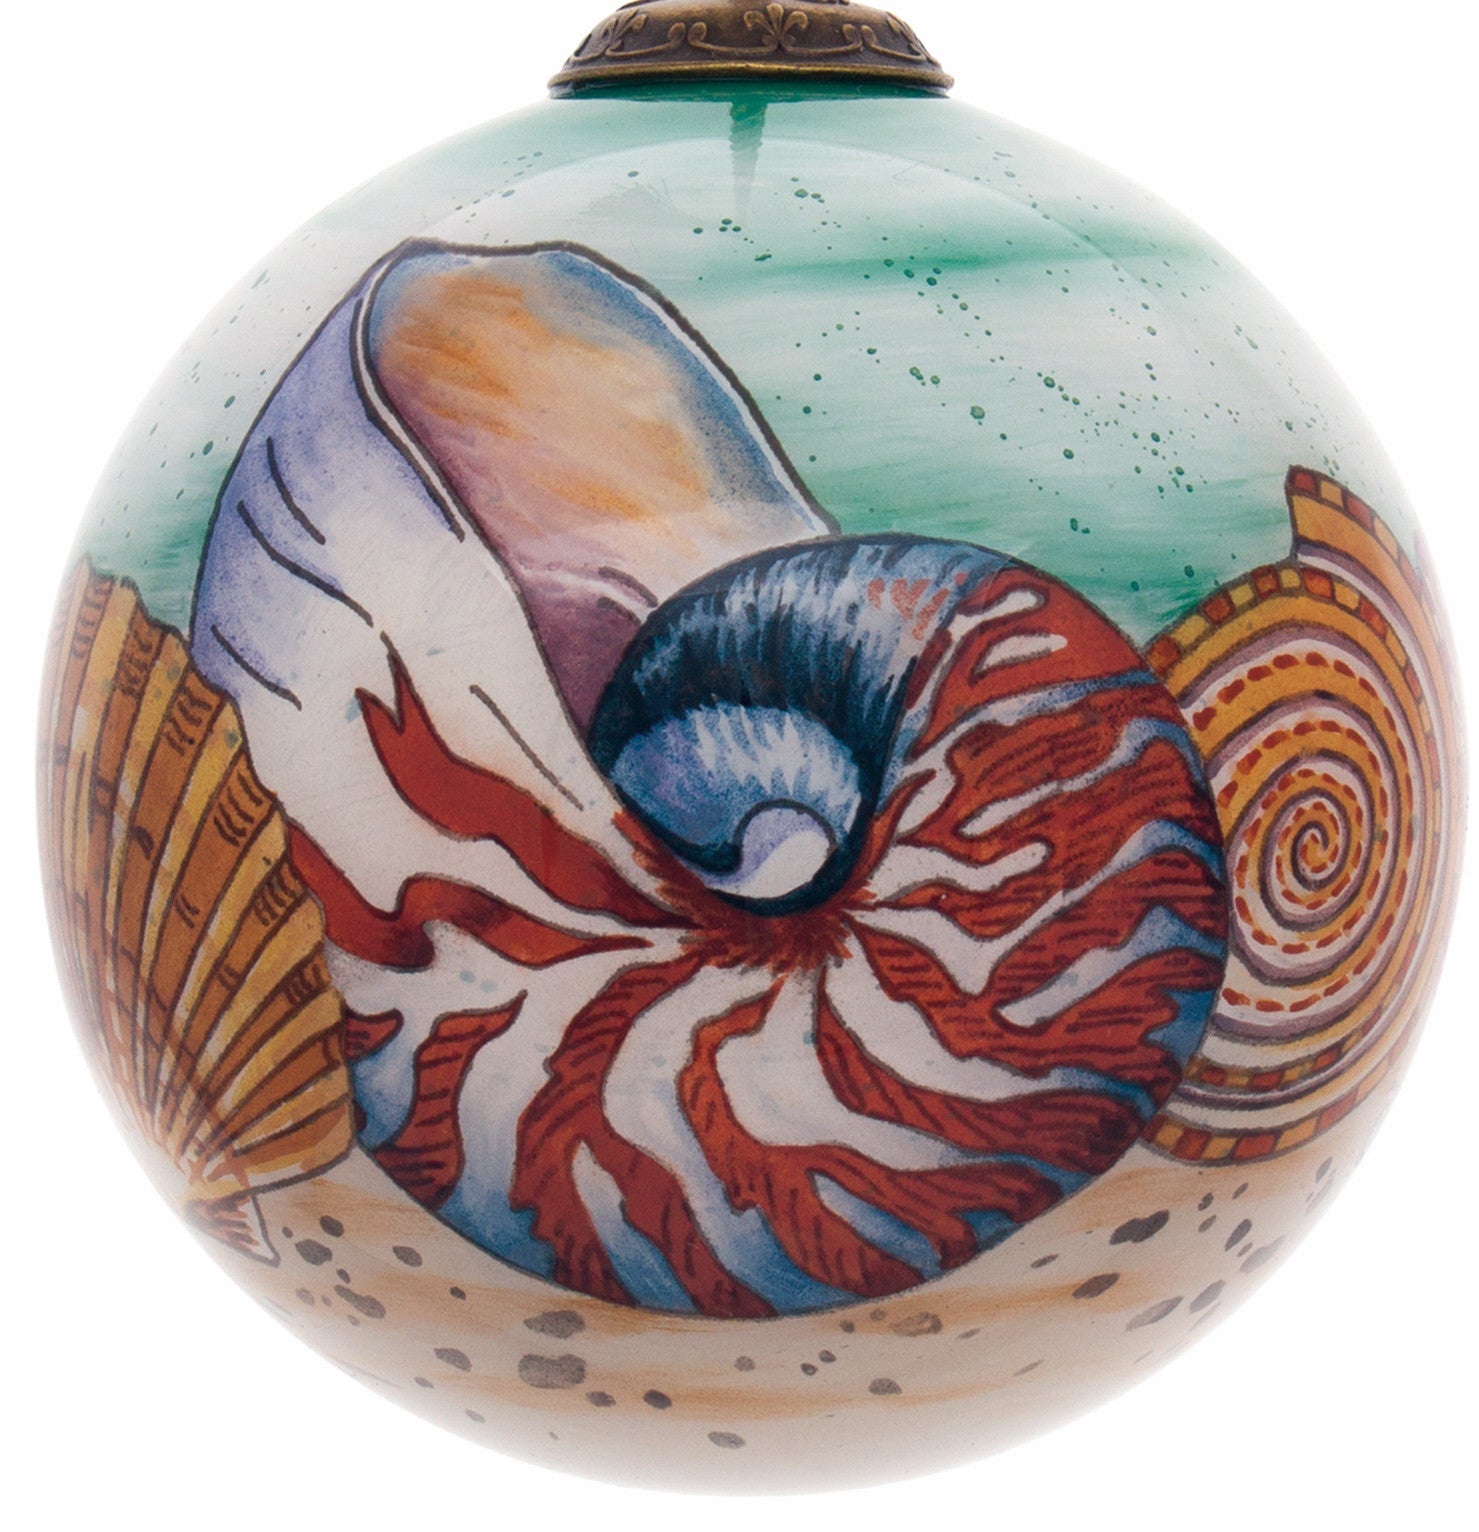 Sea Shell Hand Painted Mouth Blown Glass Ornament - Tuesday Morning-Christmas Ornaments